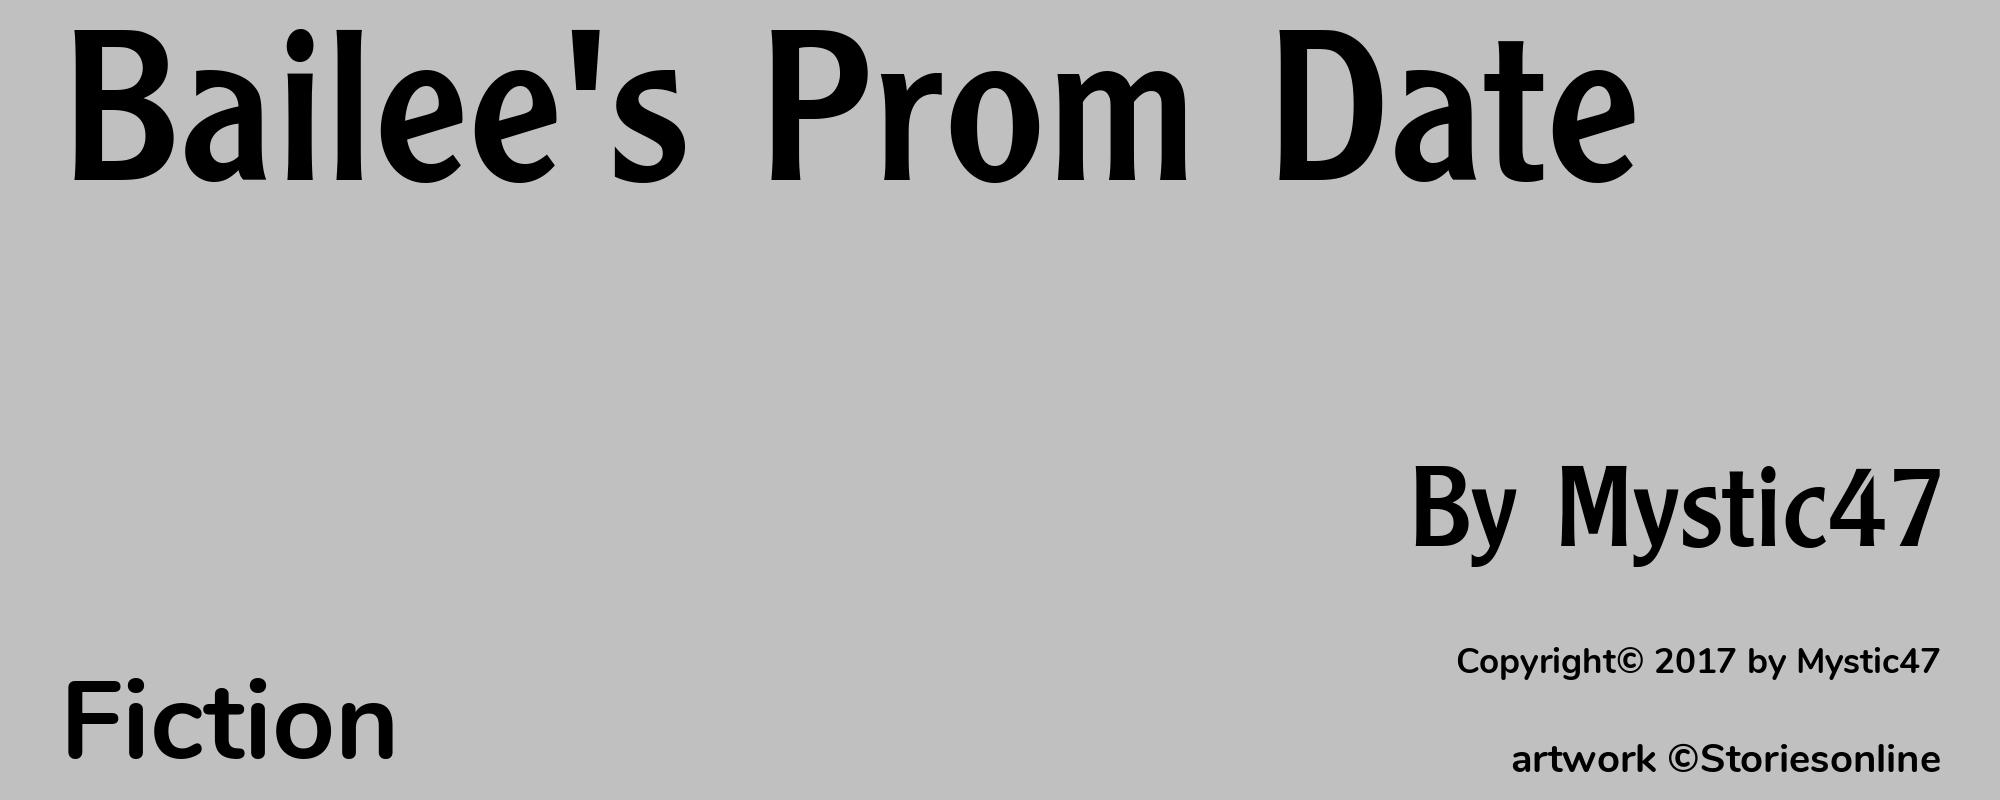 Bailee's Prom Date - Cover